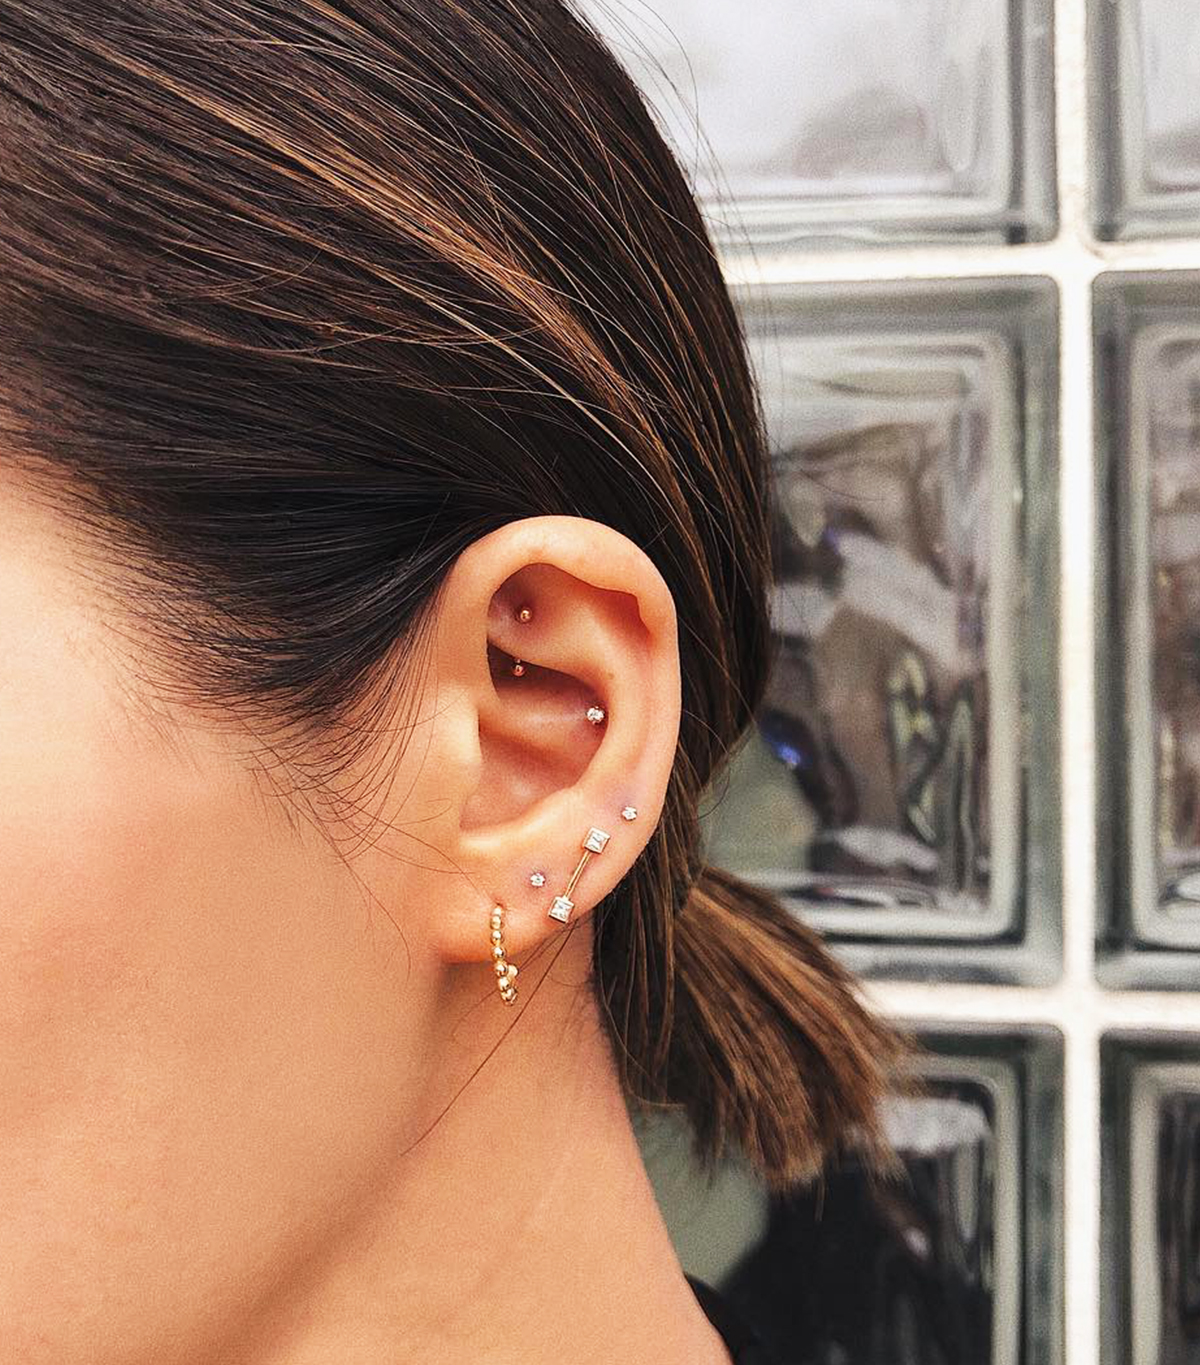 4 Ear Piercing Tips From L.A.'s Most 